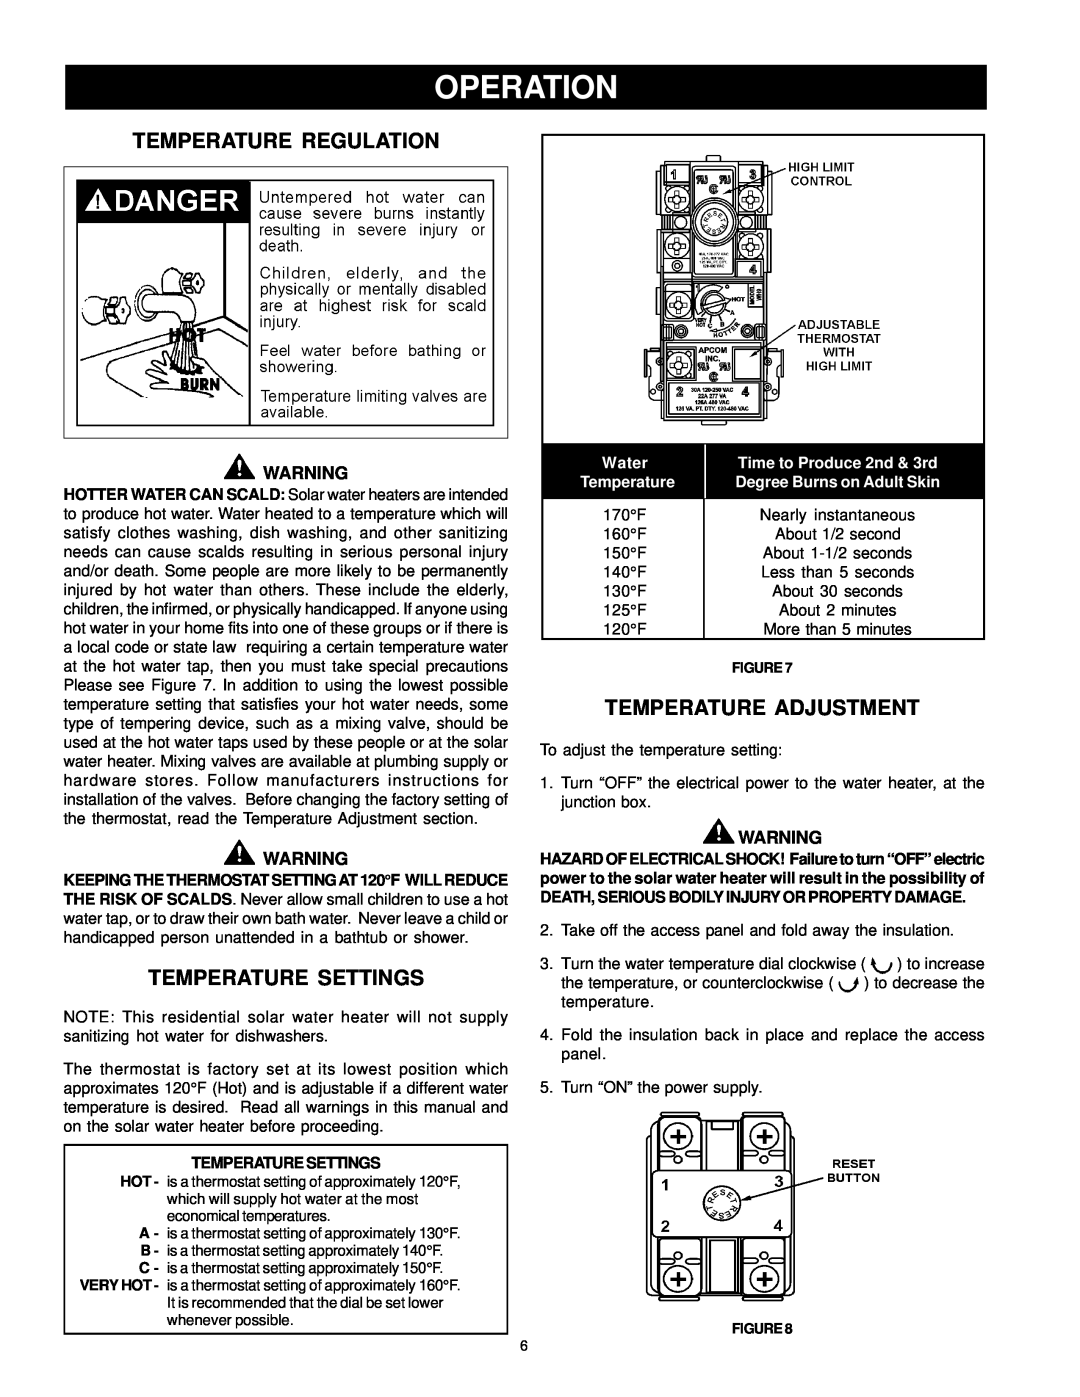 American Water Heater 317365-002 Operation, Temperature Regulation, Temperature Settings, Temperature Adjustment, Water 